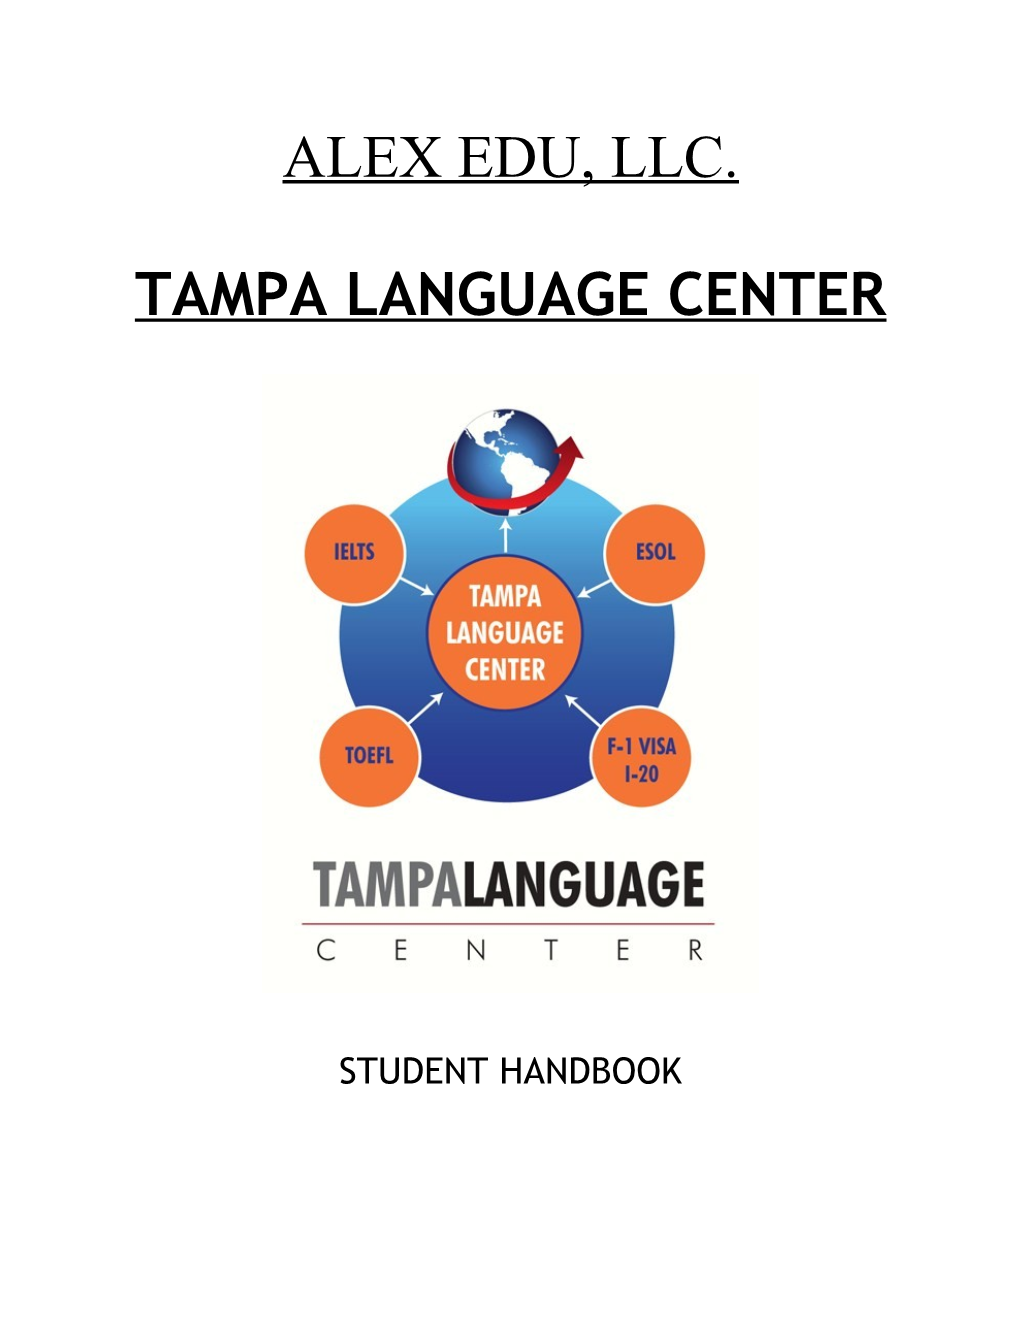 Welcome to Tampa Language Center!